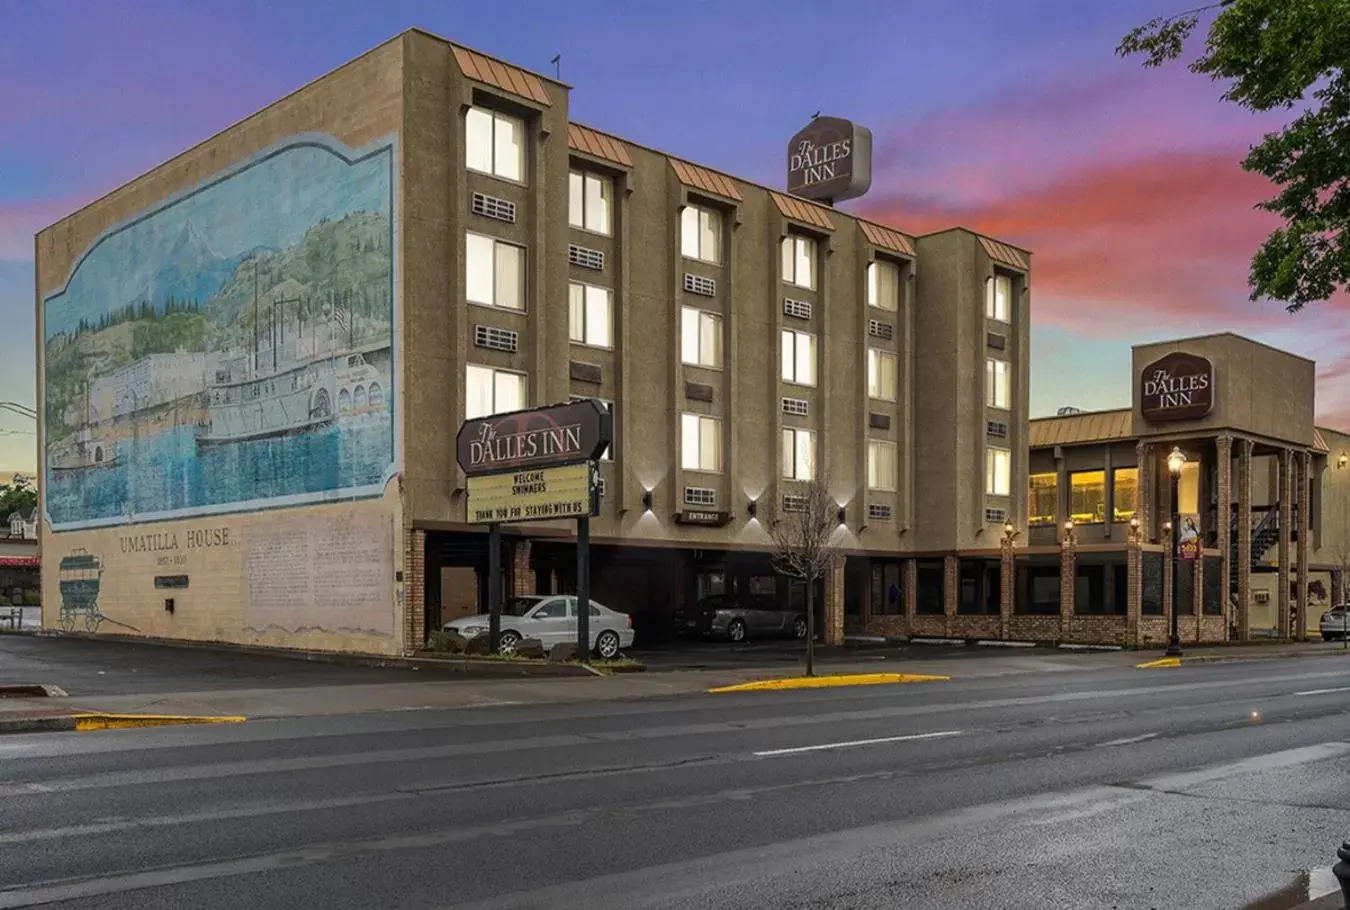 Property Building in The Dalles Inn